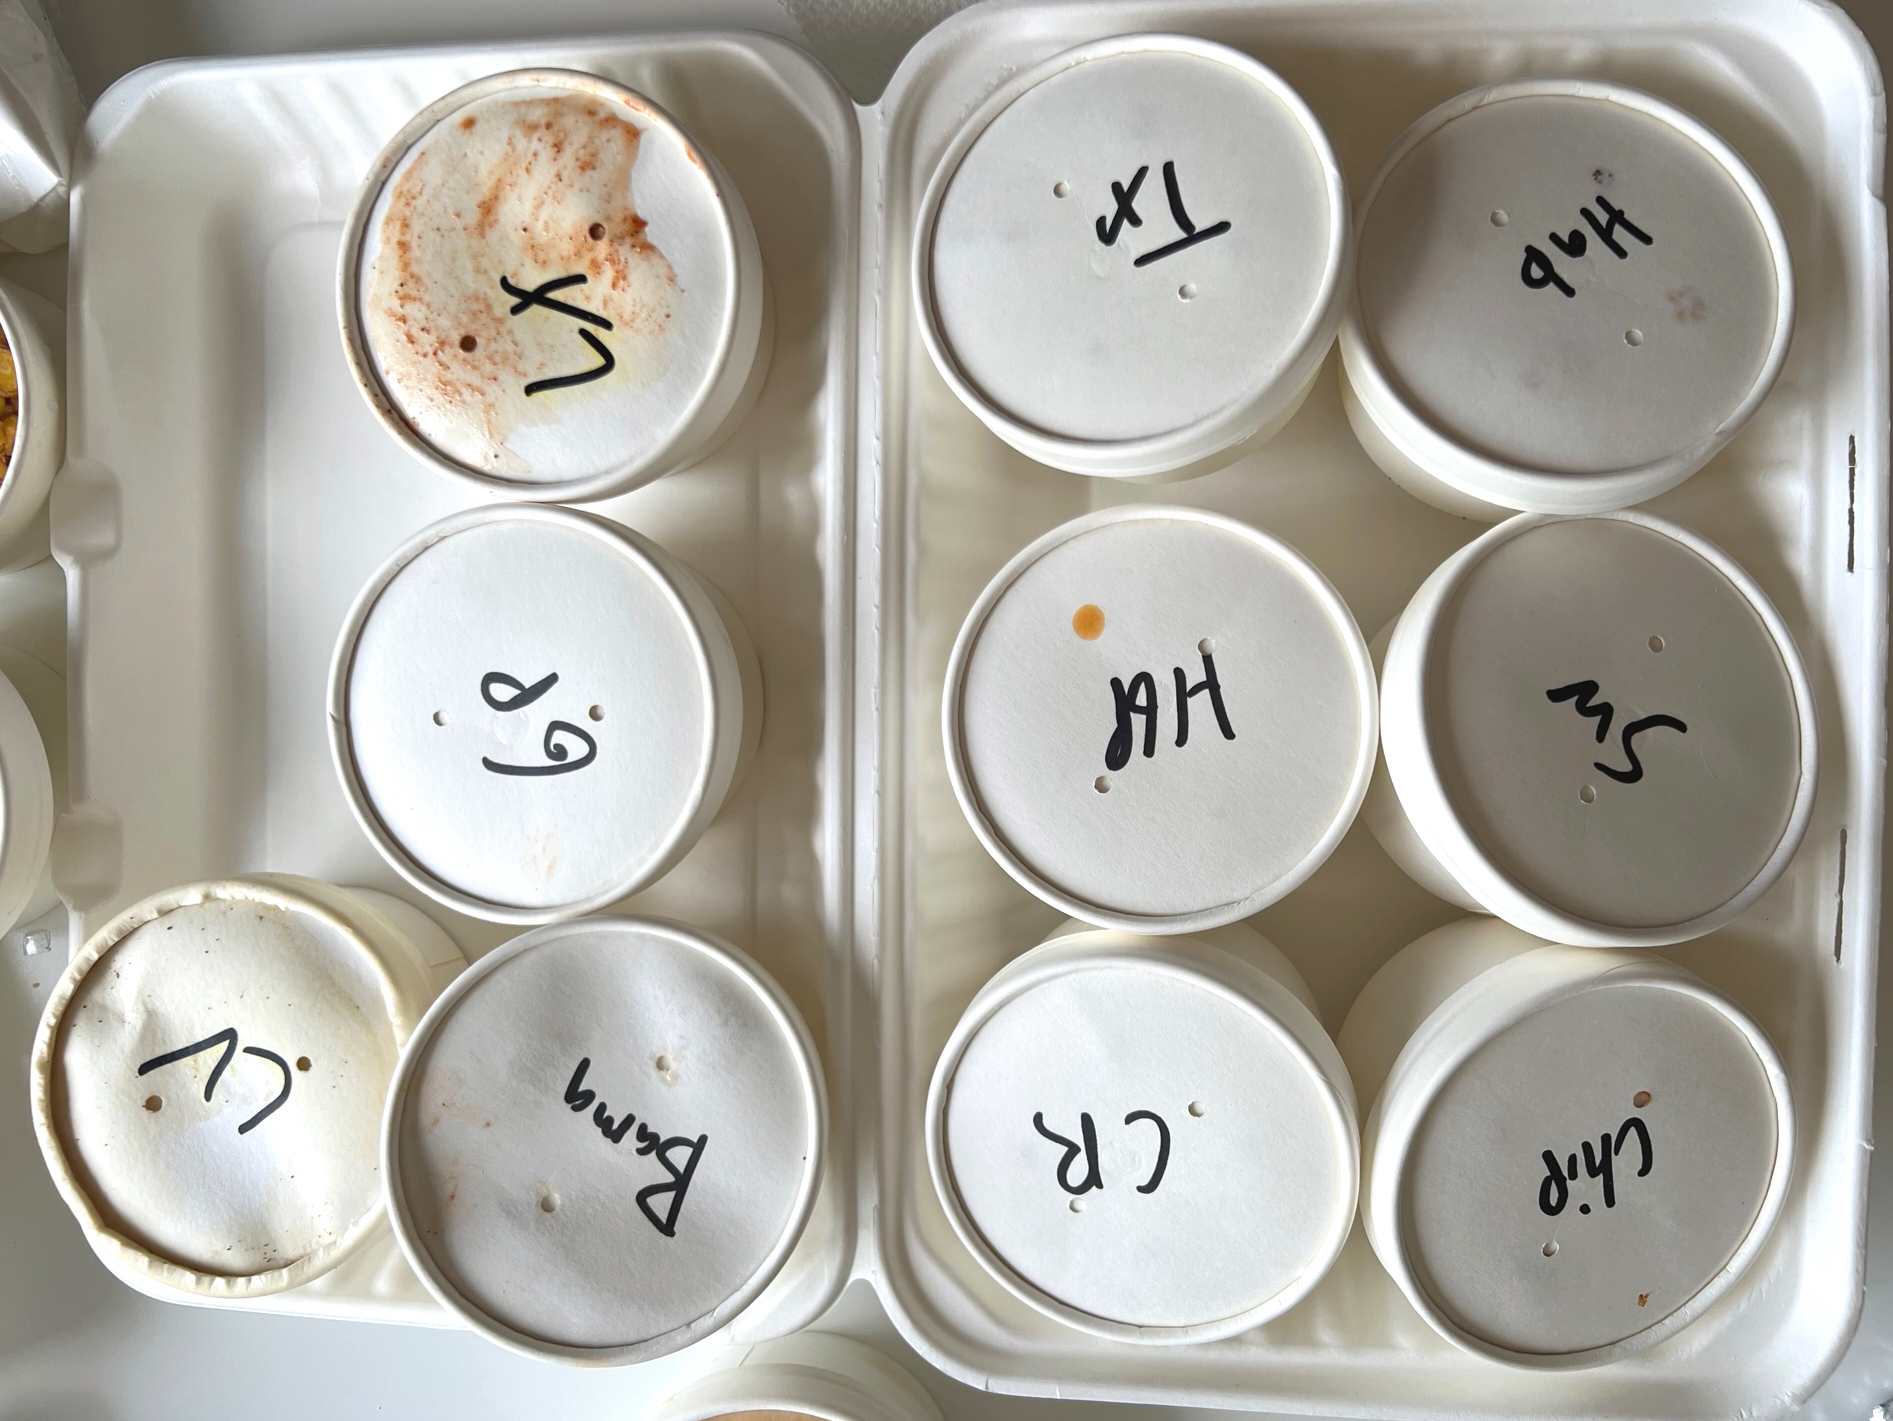 In a white styrofoam container, there are ten white lidded cups with barbecue sauce from Black Dog Smoke and Ale House in Champaign. Each cup has a shortened version of the sauce's name written in Sharpie. Photo by Alyssa Buckley.